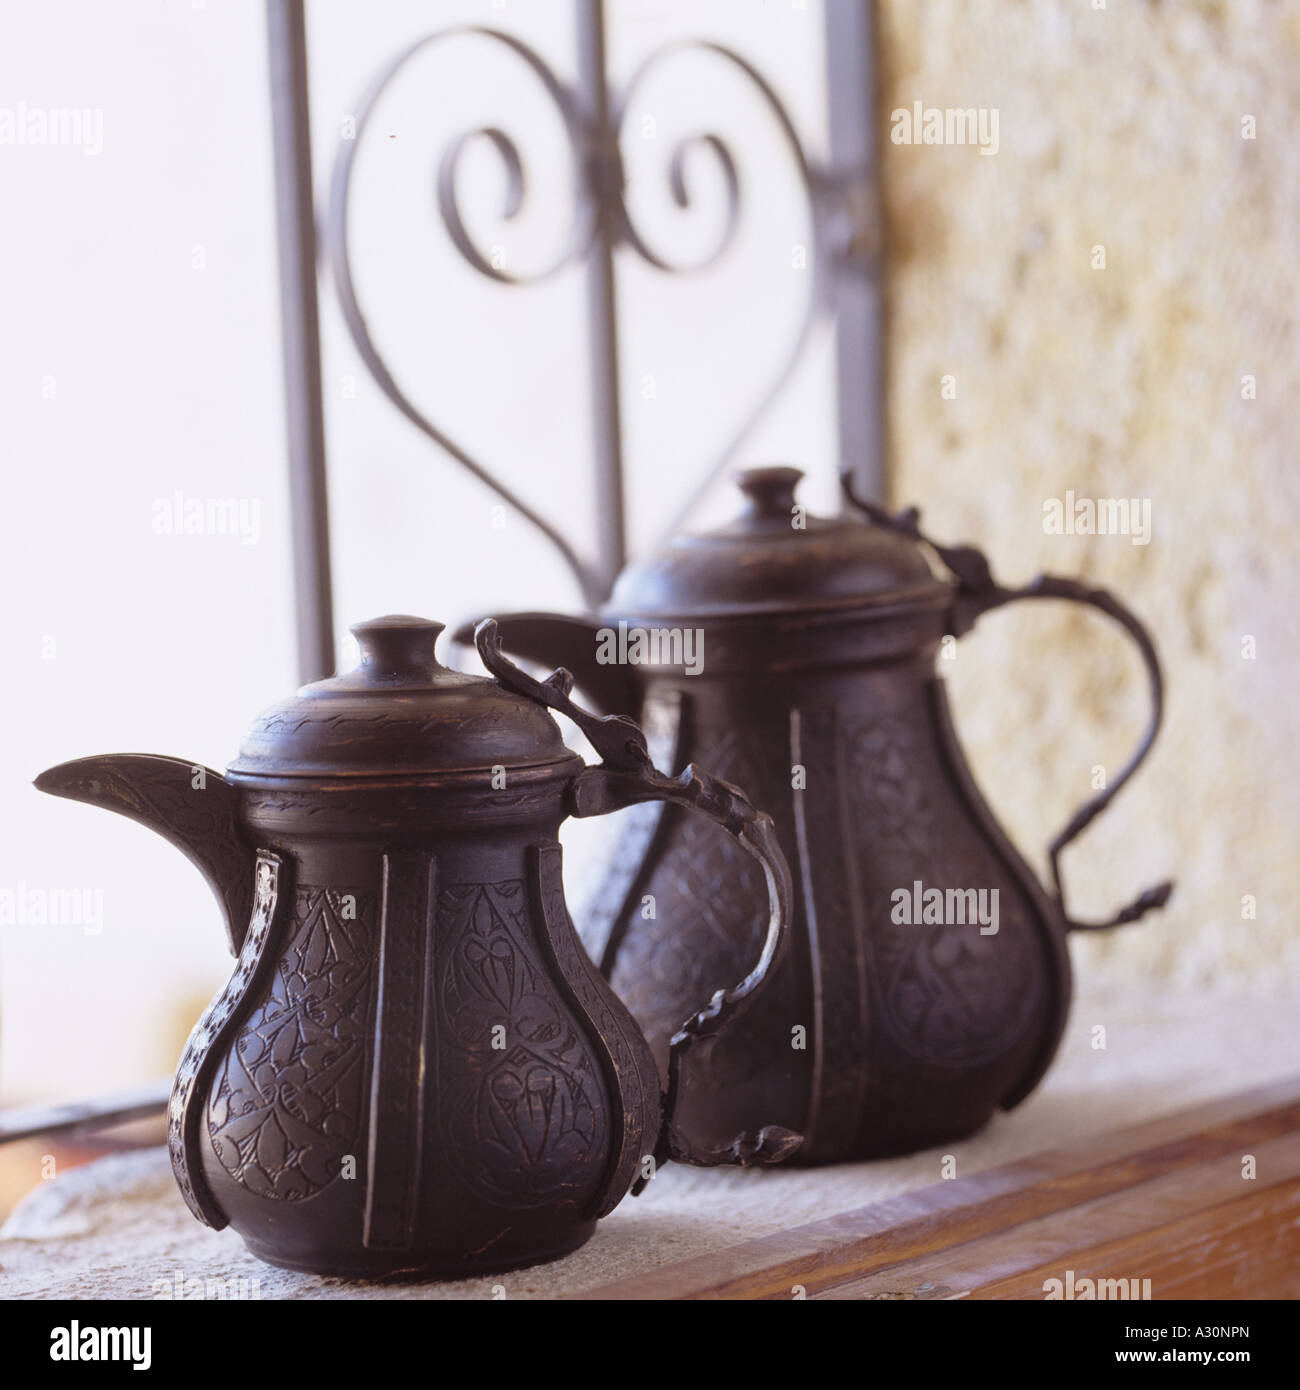 Shiny Vintage Metal Coffee Pot On White Table Stock Photo, Picture and  Royalty Free Image. Image 40463613.